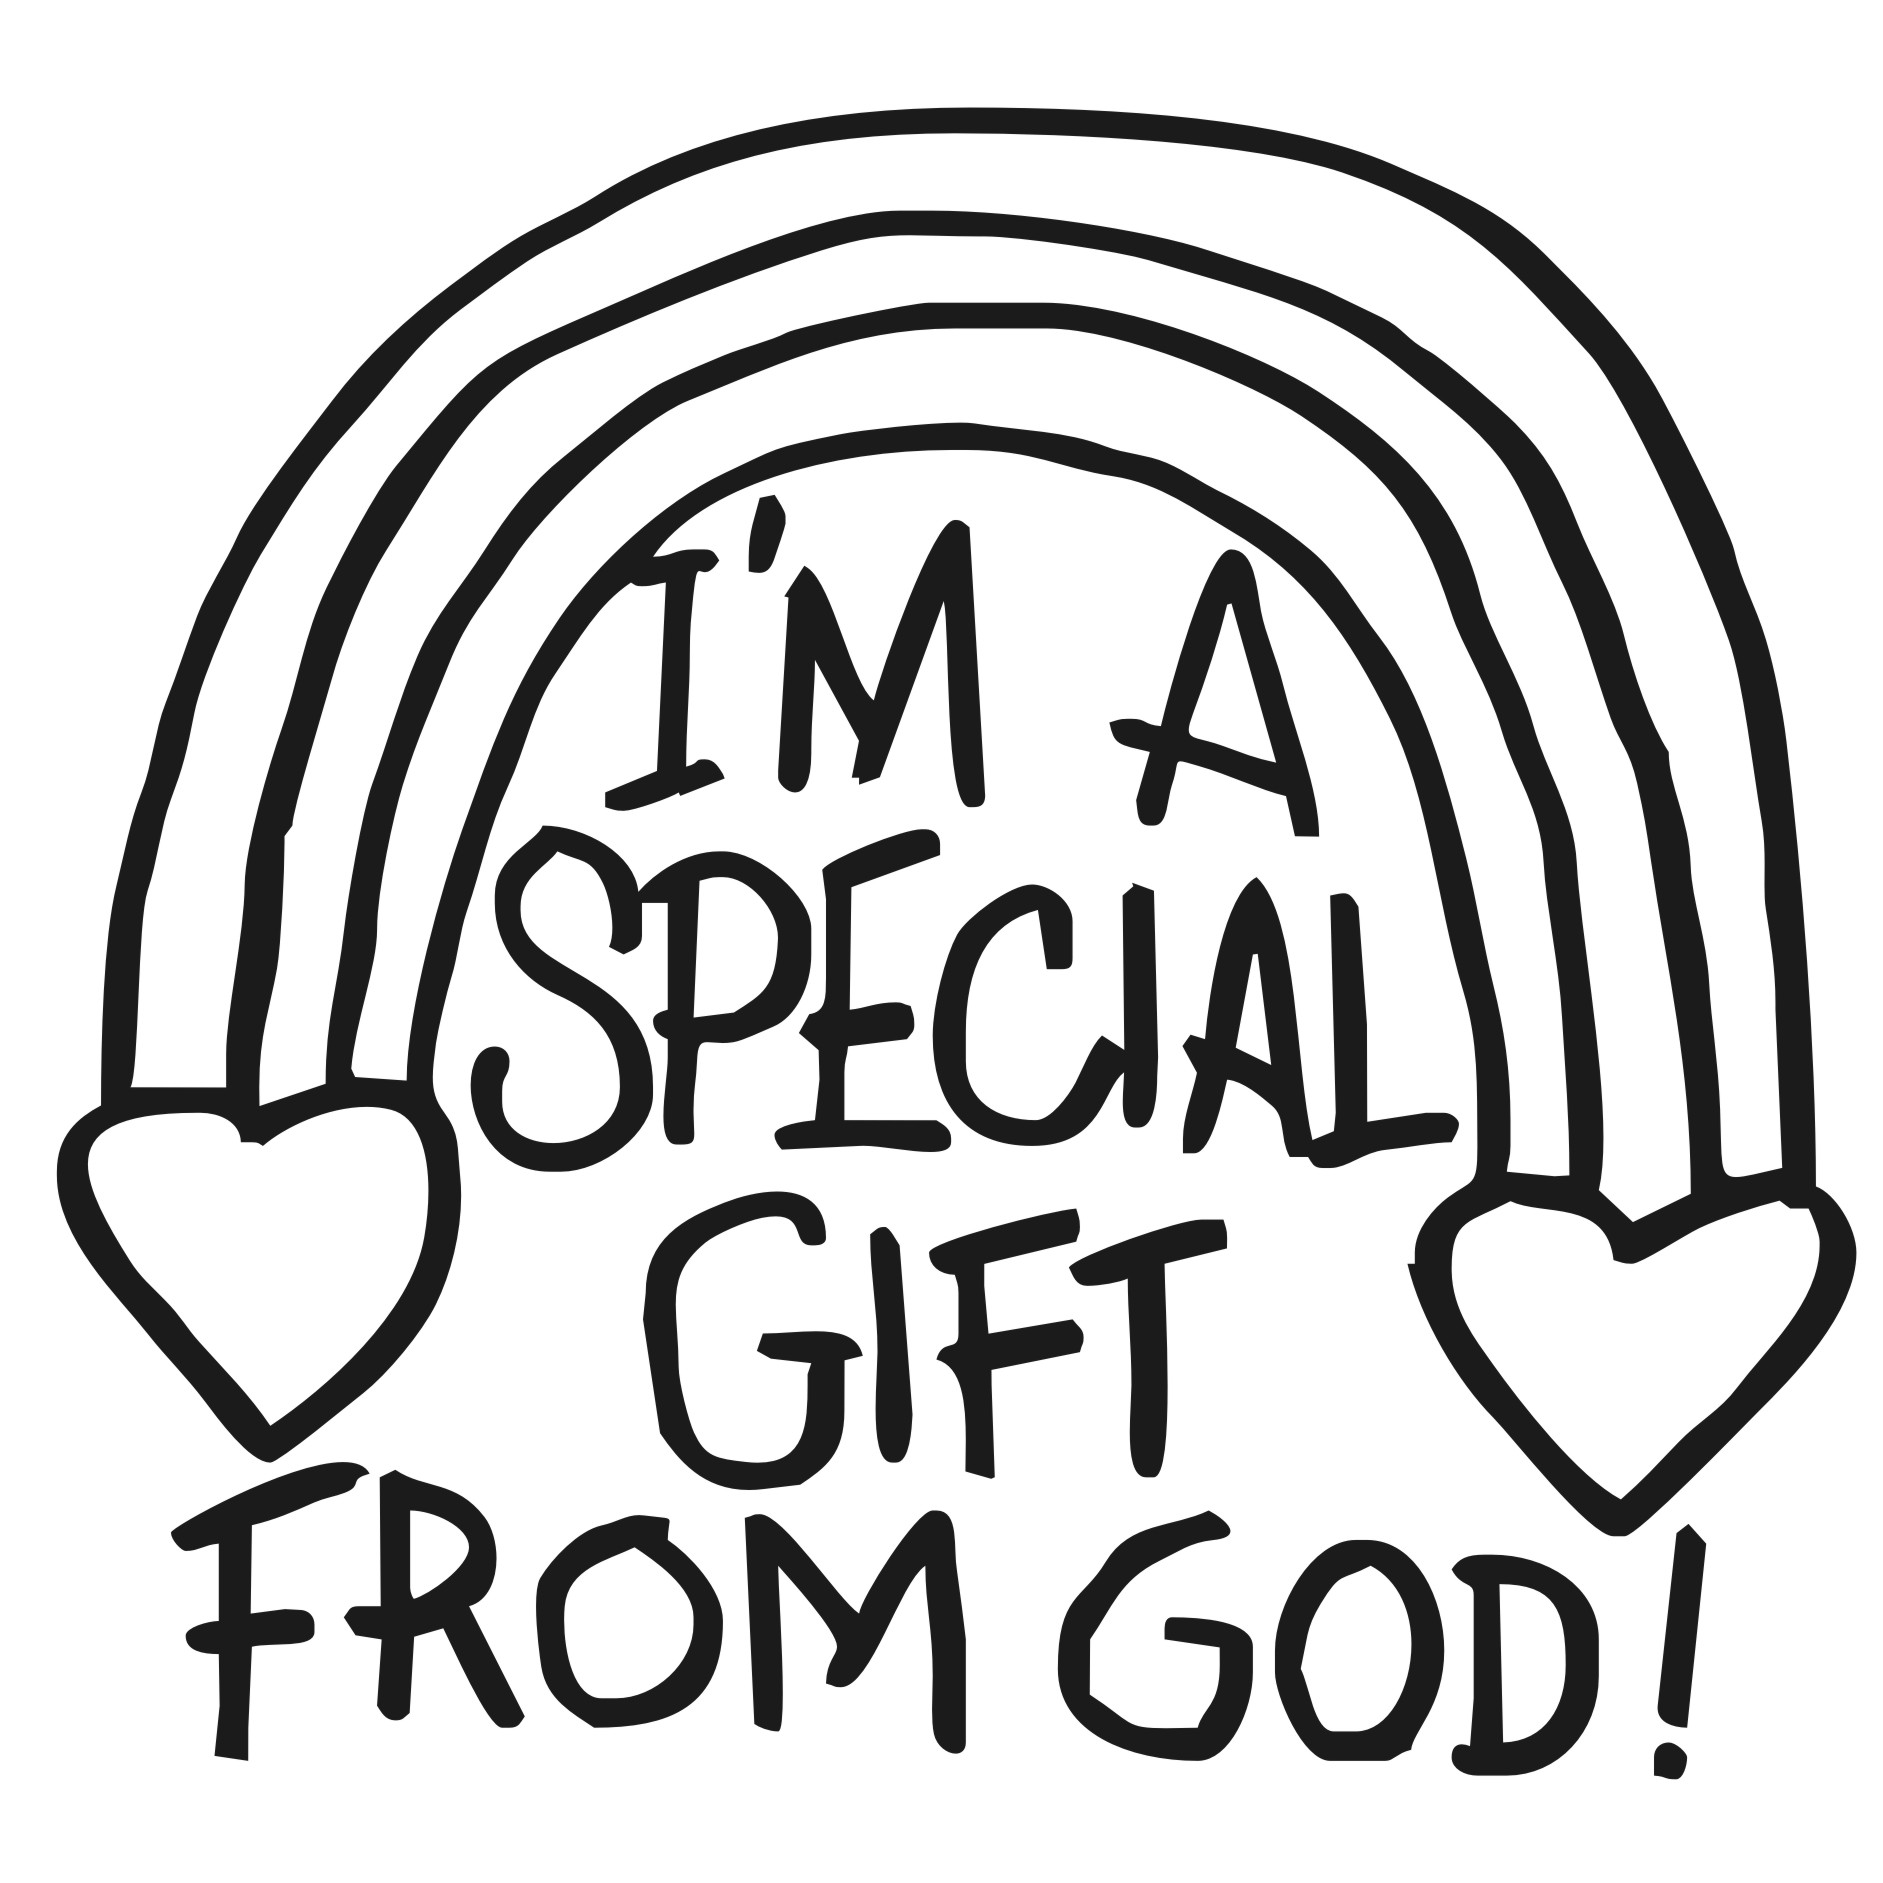 Clipart & Design Ideas: Clipart » Religious » Special Gift from God